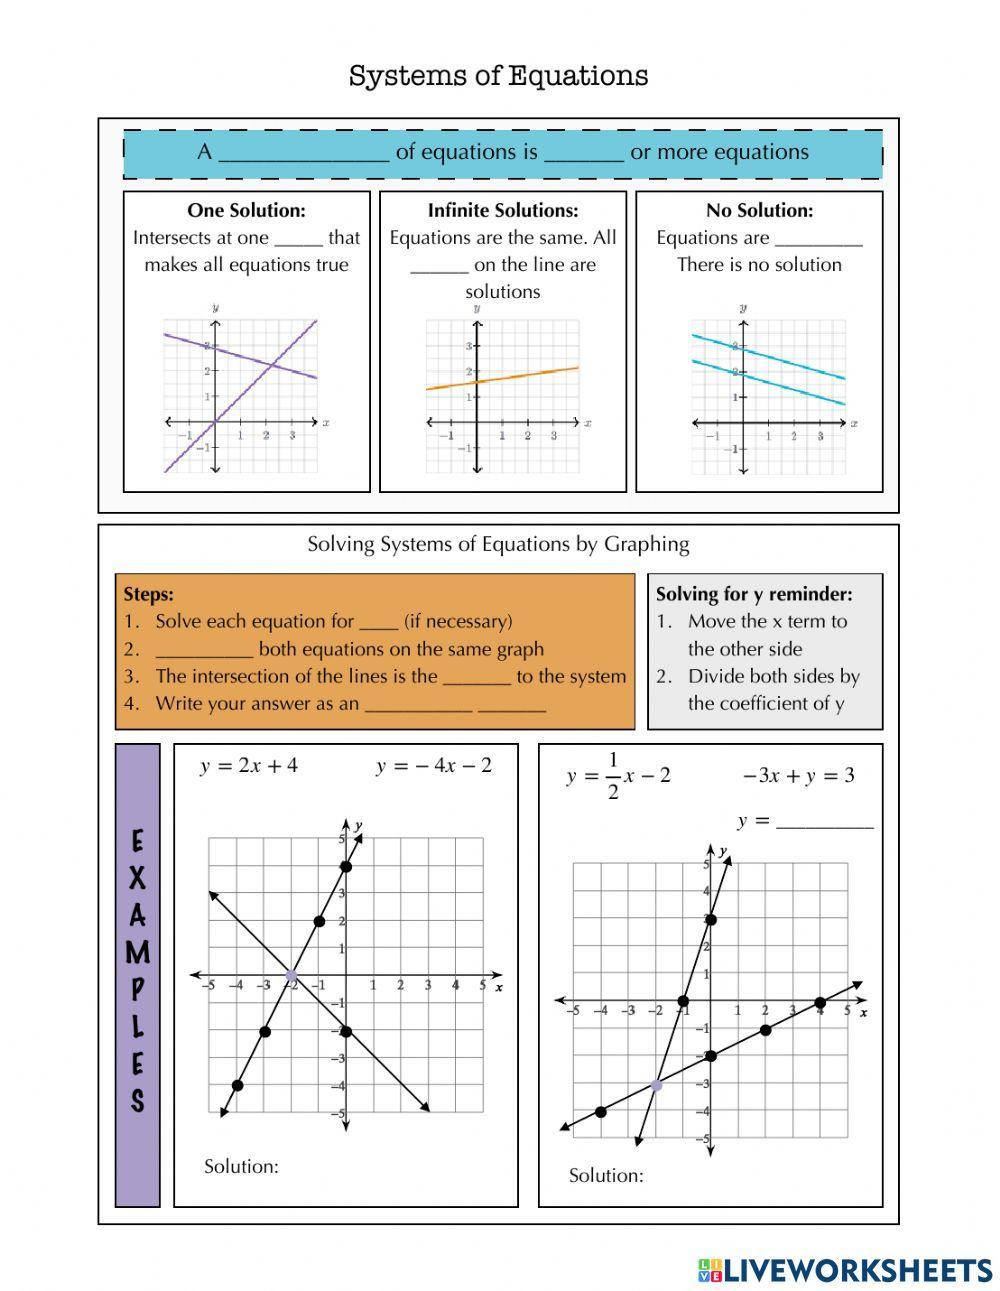 Graphing Systems of Equations Notes